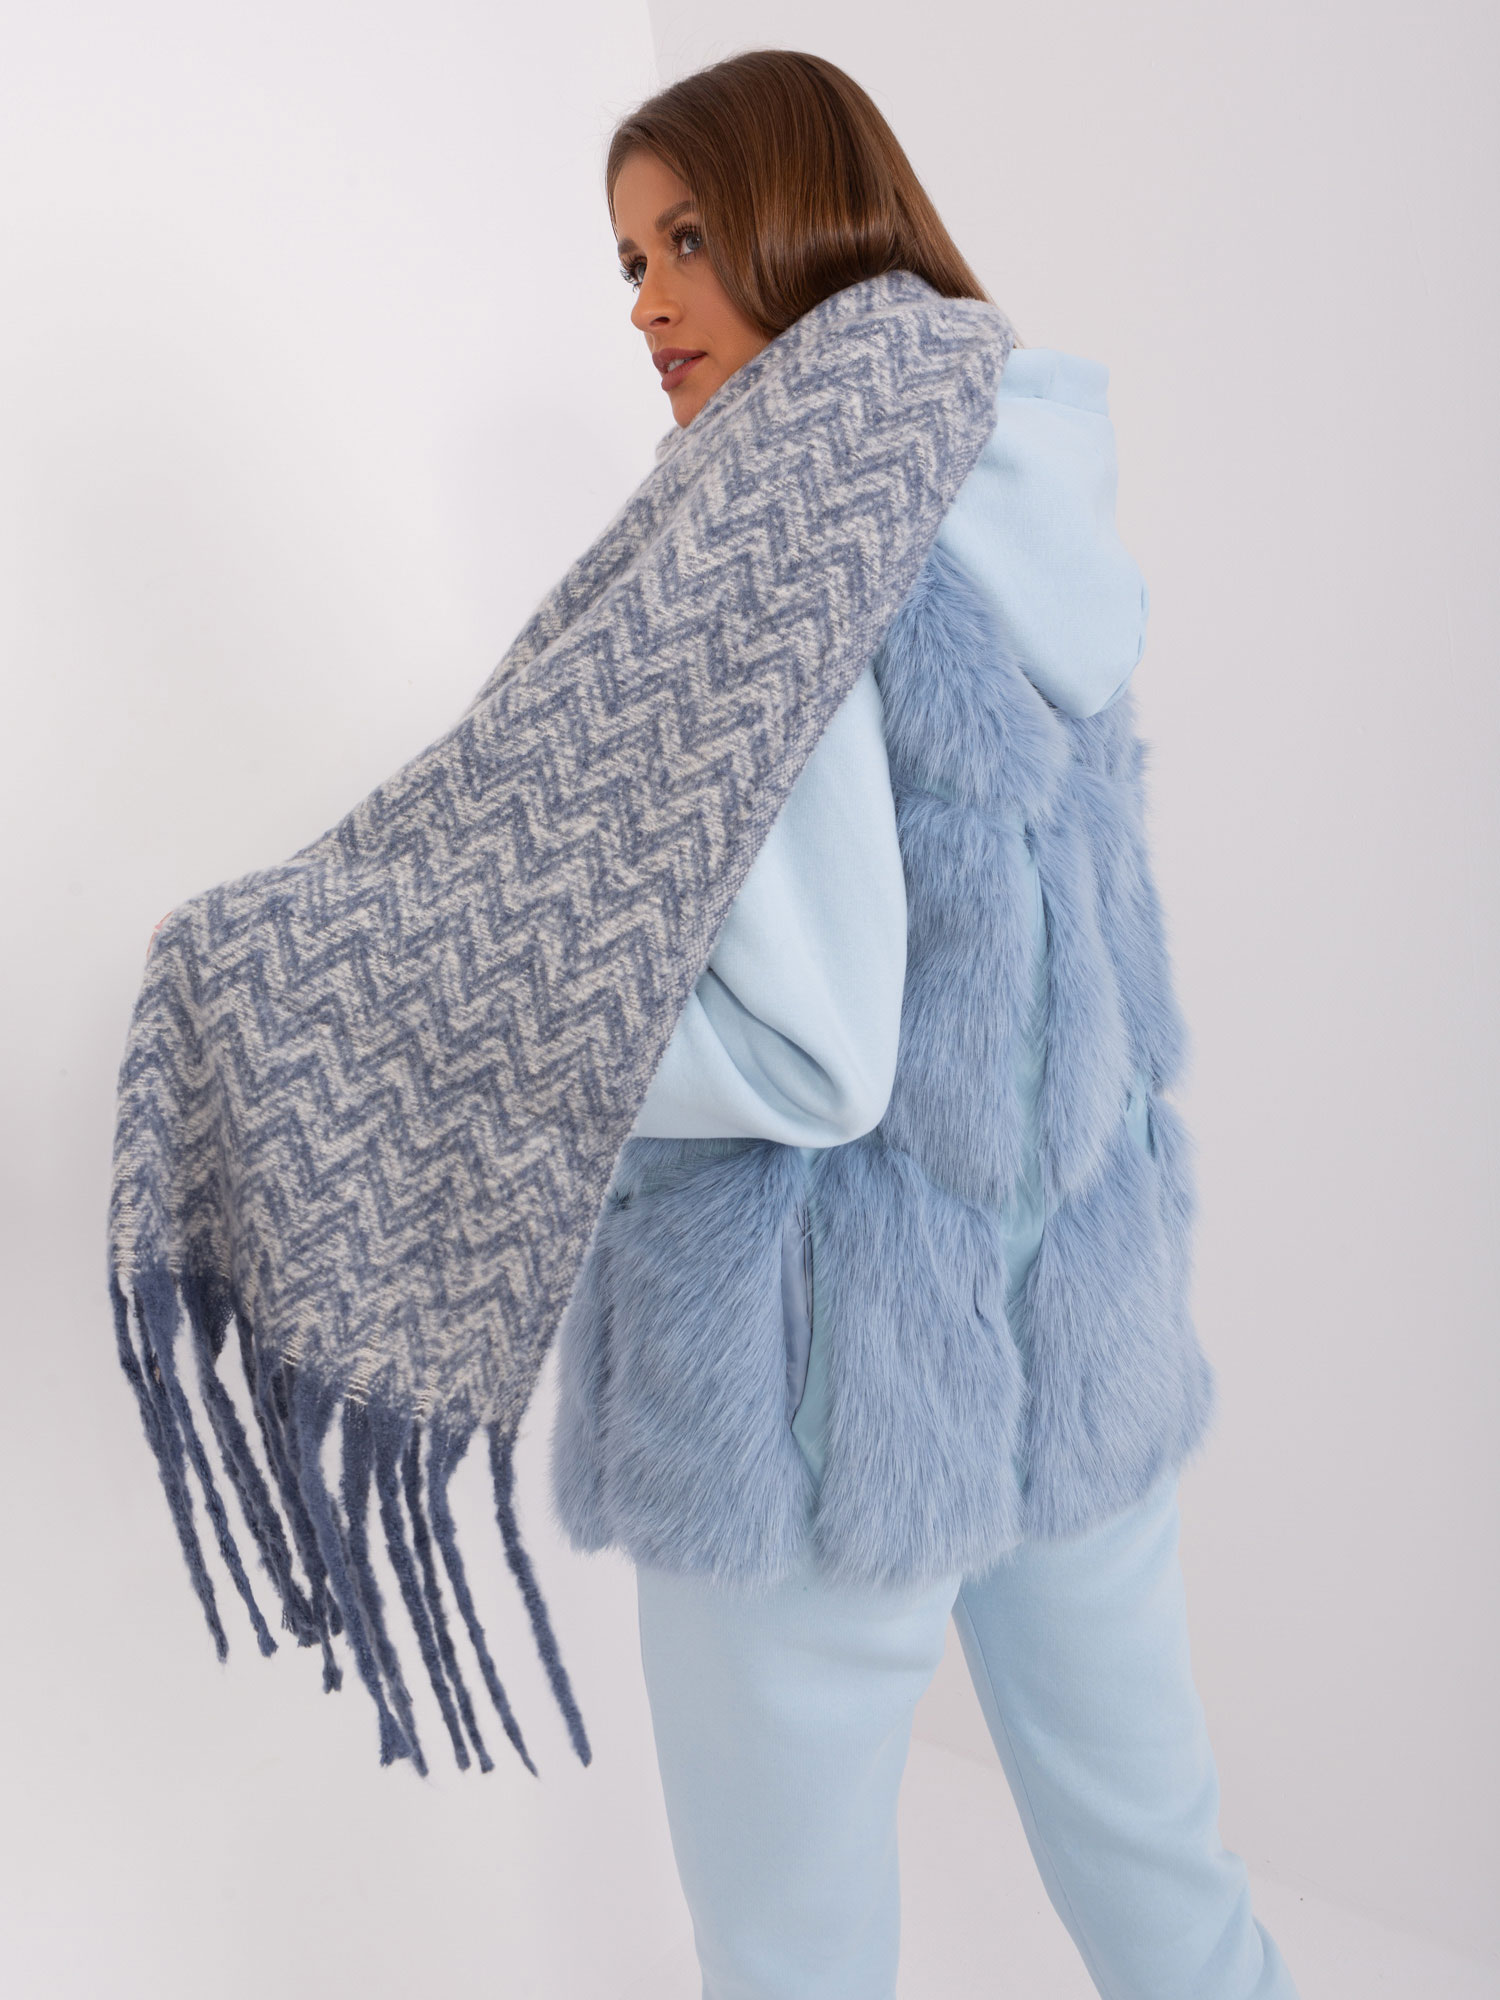 Women's white and blue scarf with fringe